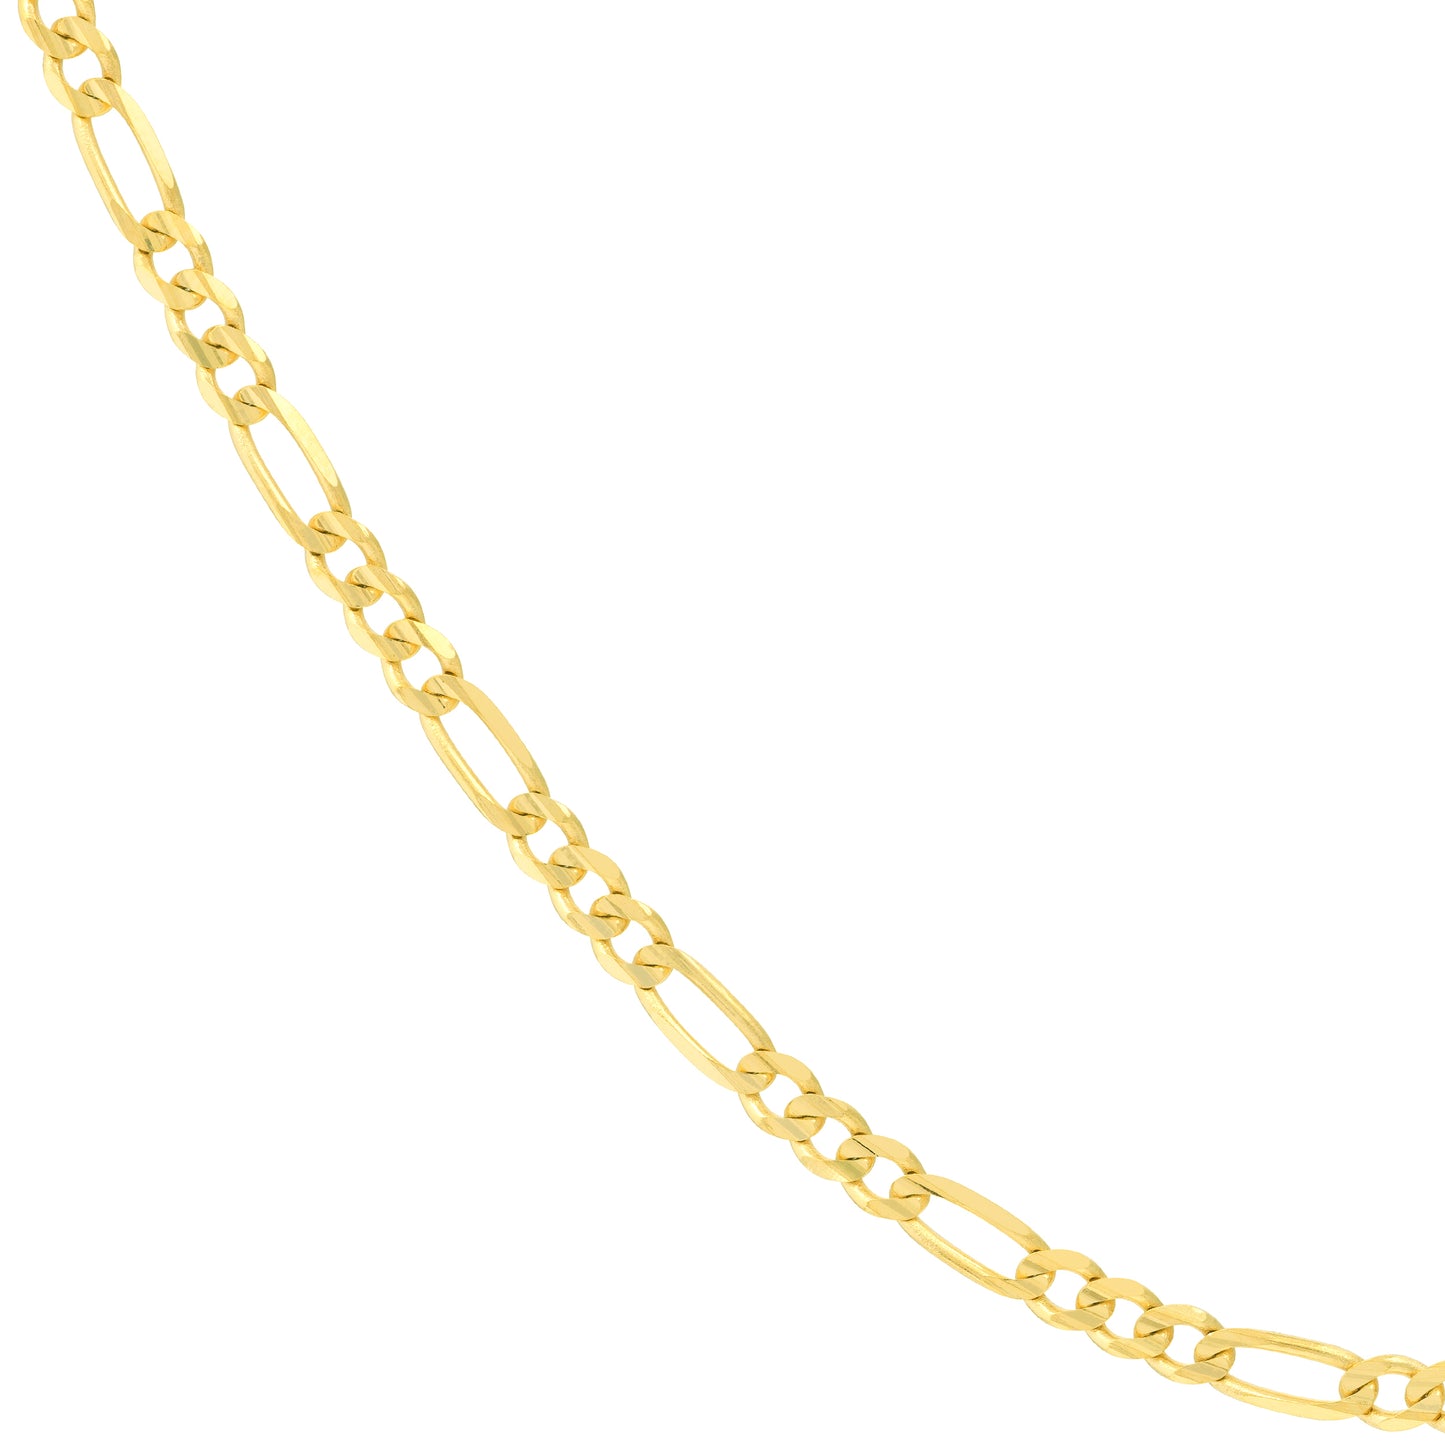 14k Gold Cuban Link Chain Figaro Necklace, 22 Inch, 8.5 gr and 24 Inch, 9.3 gr